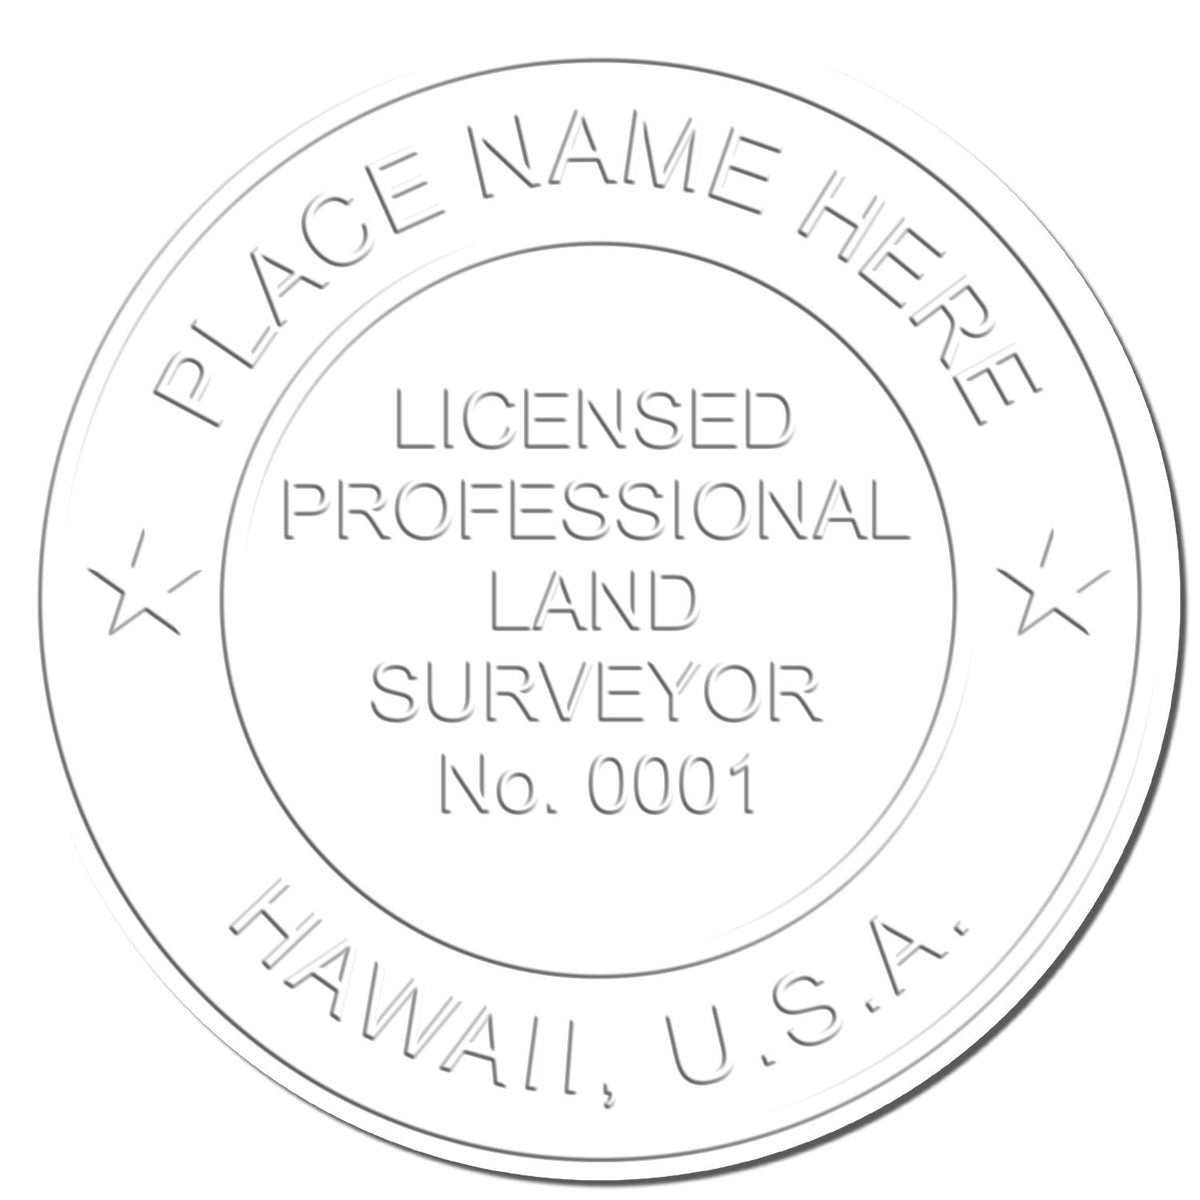 This paper is stamped with a sample imprint of the Long Reach Hawaii Land Surveyor Seal, signifying its quality and reliability.